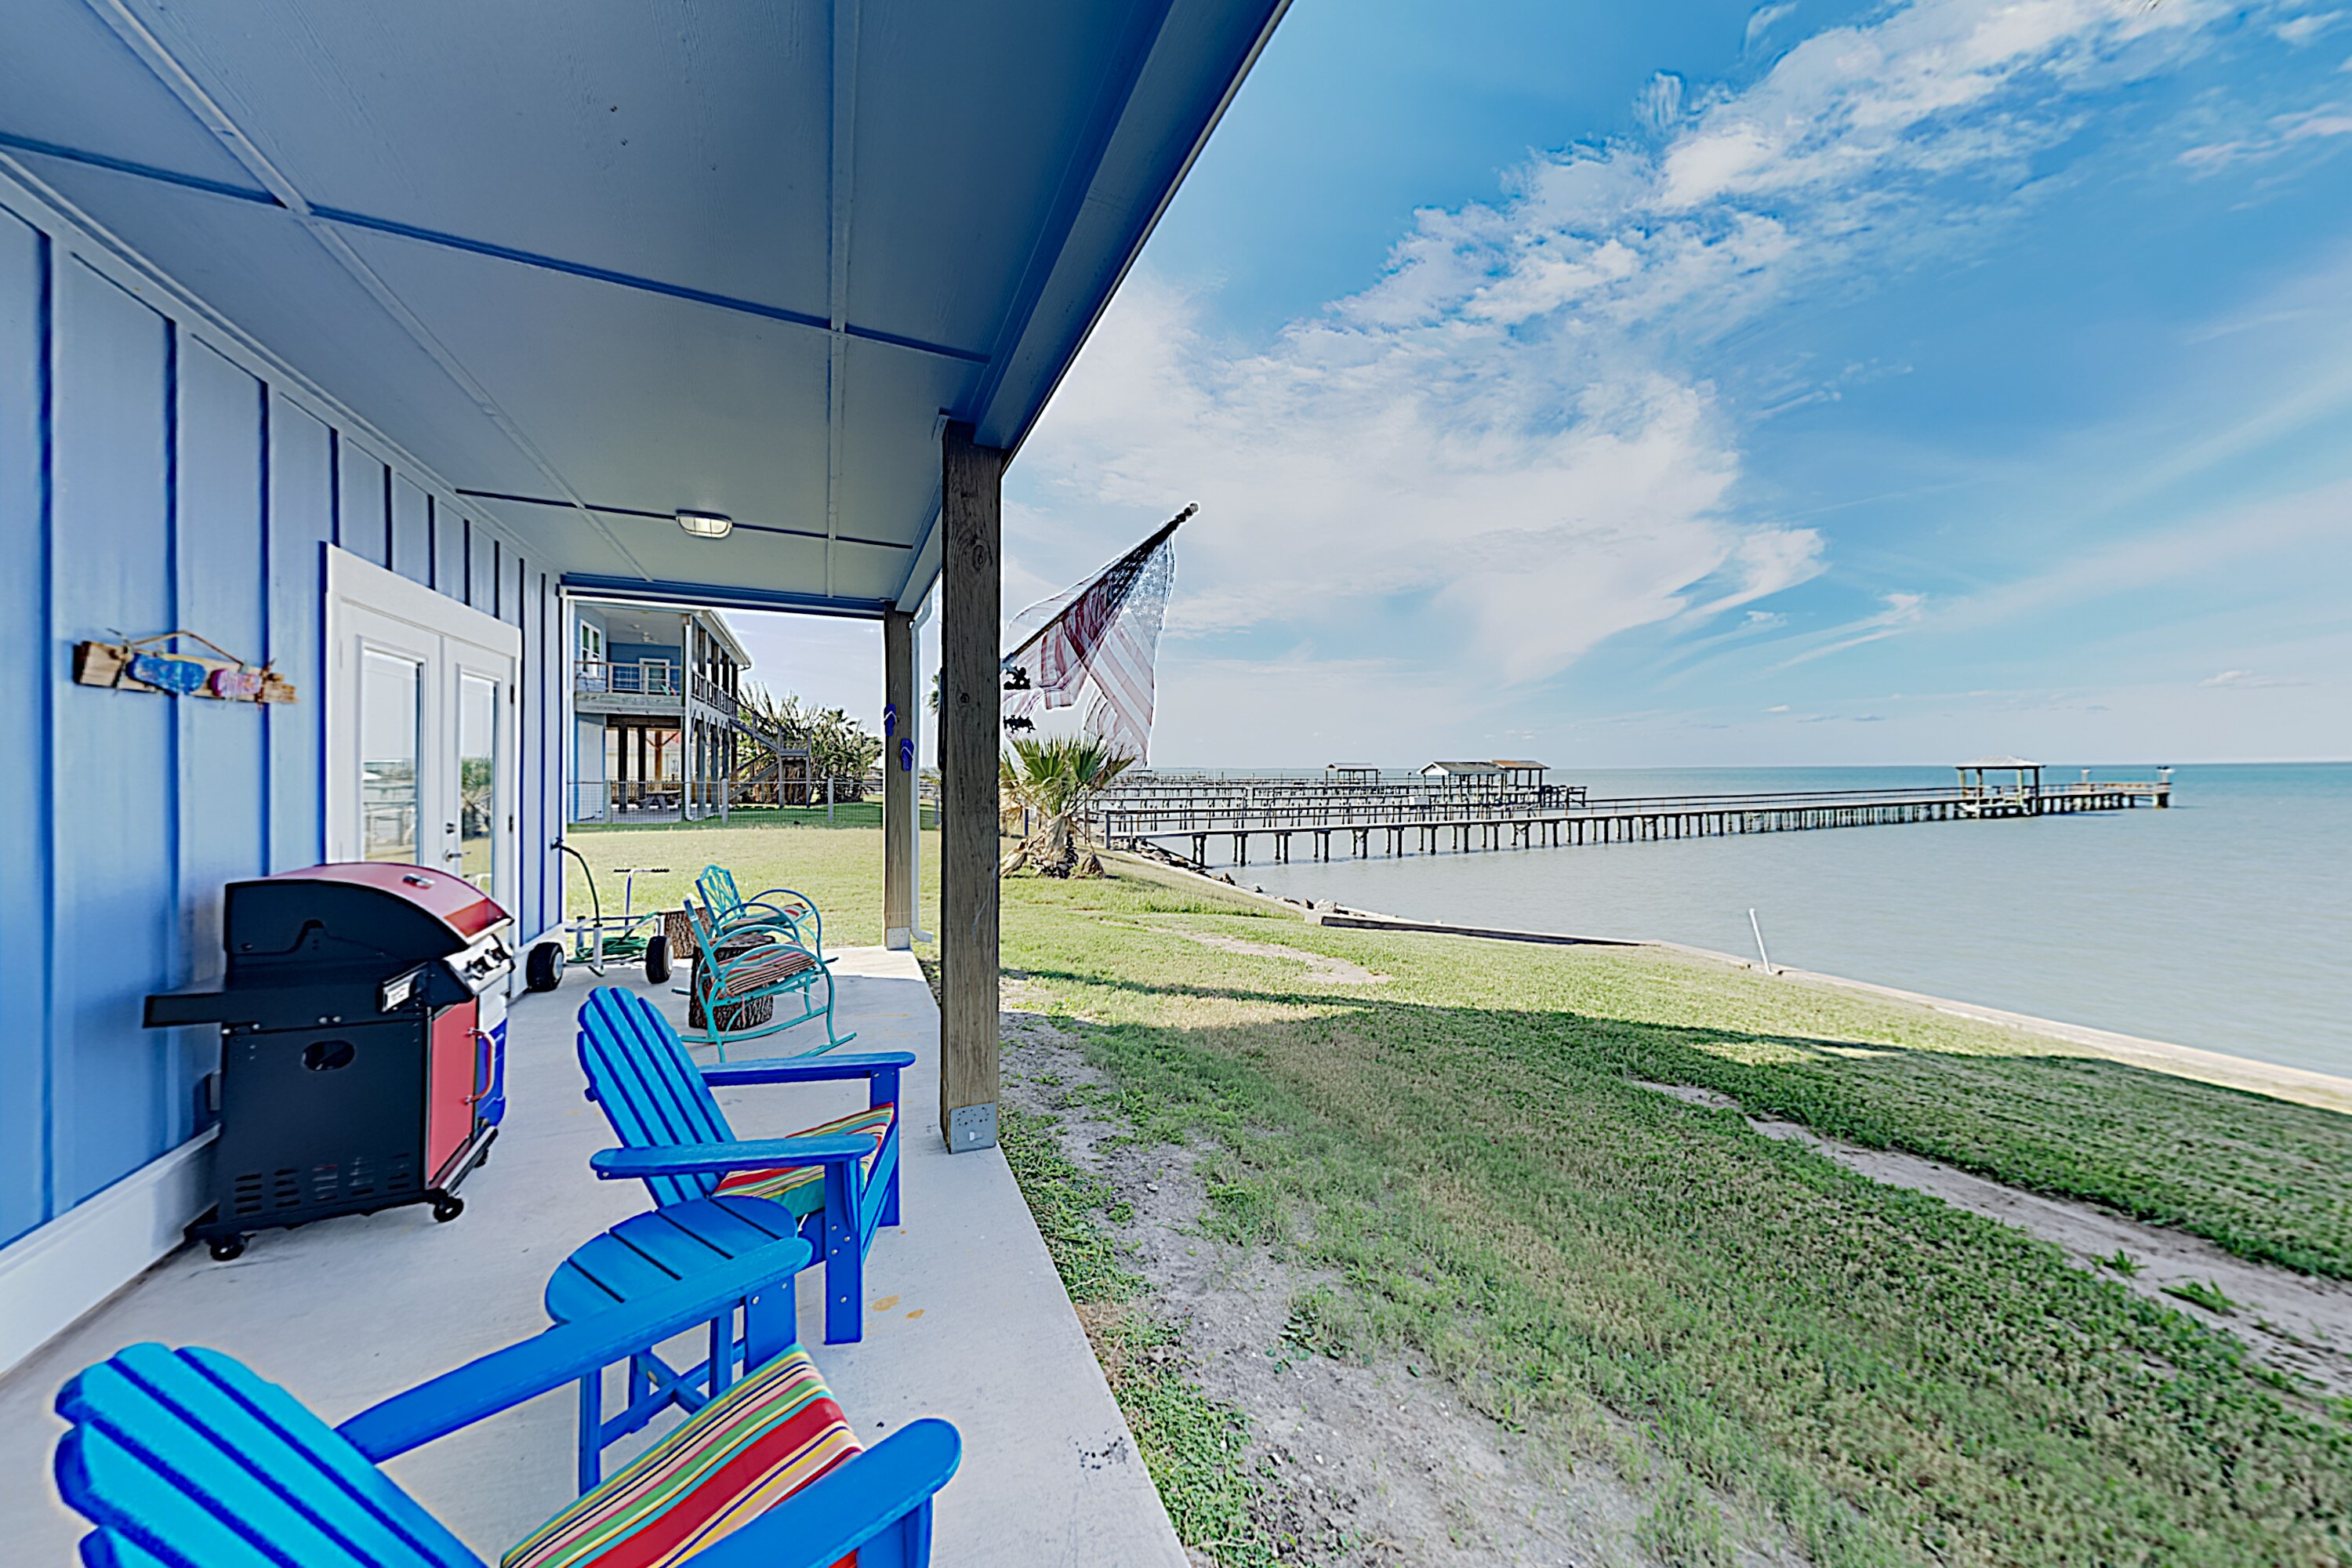 Welcome to Rockport! This condo is professionally managed by TurnKey Vacation Rentals.